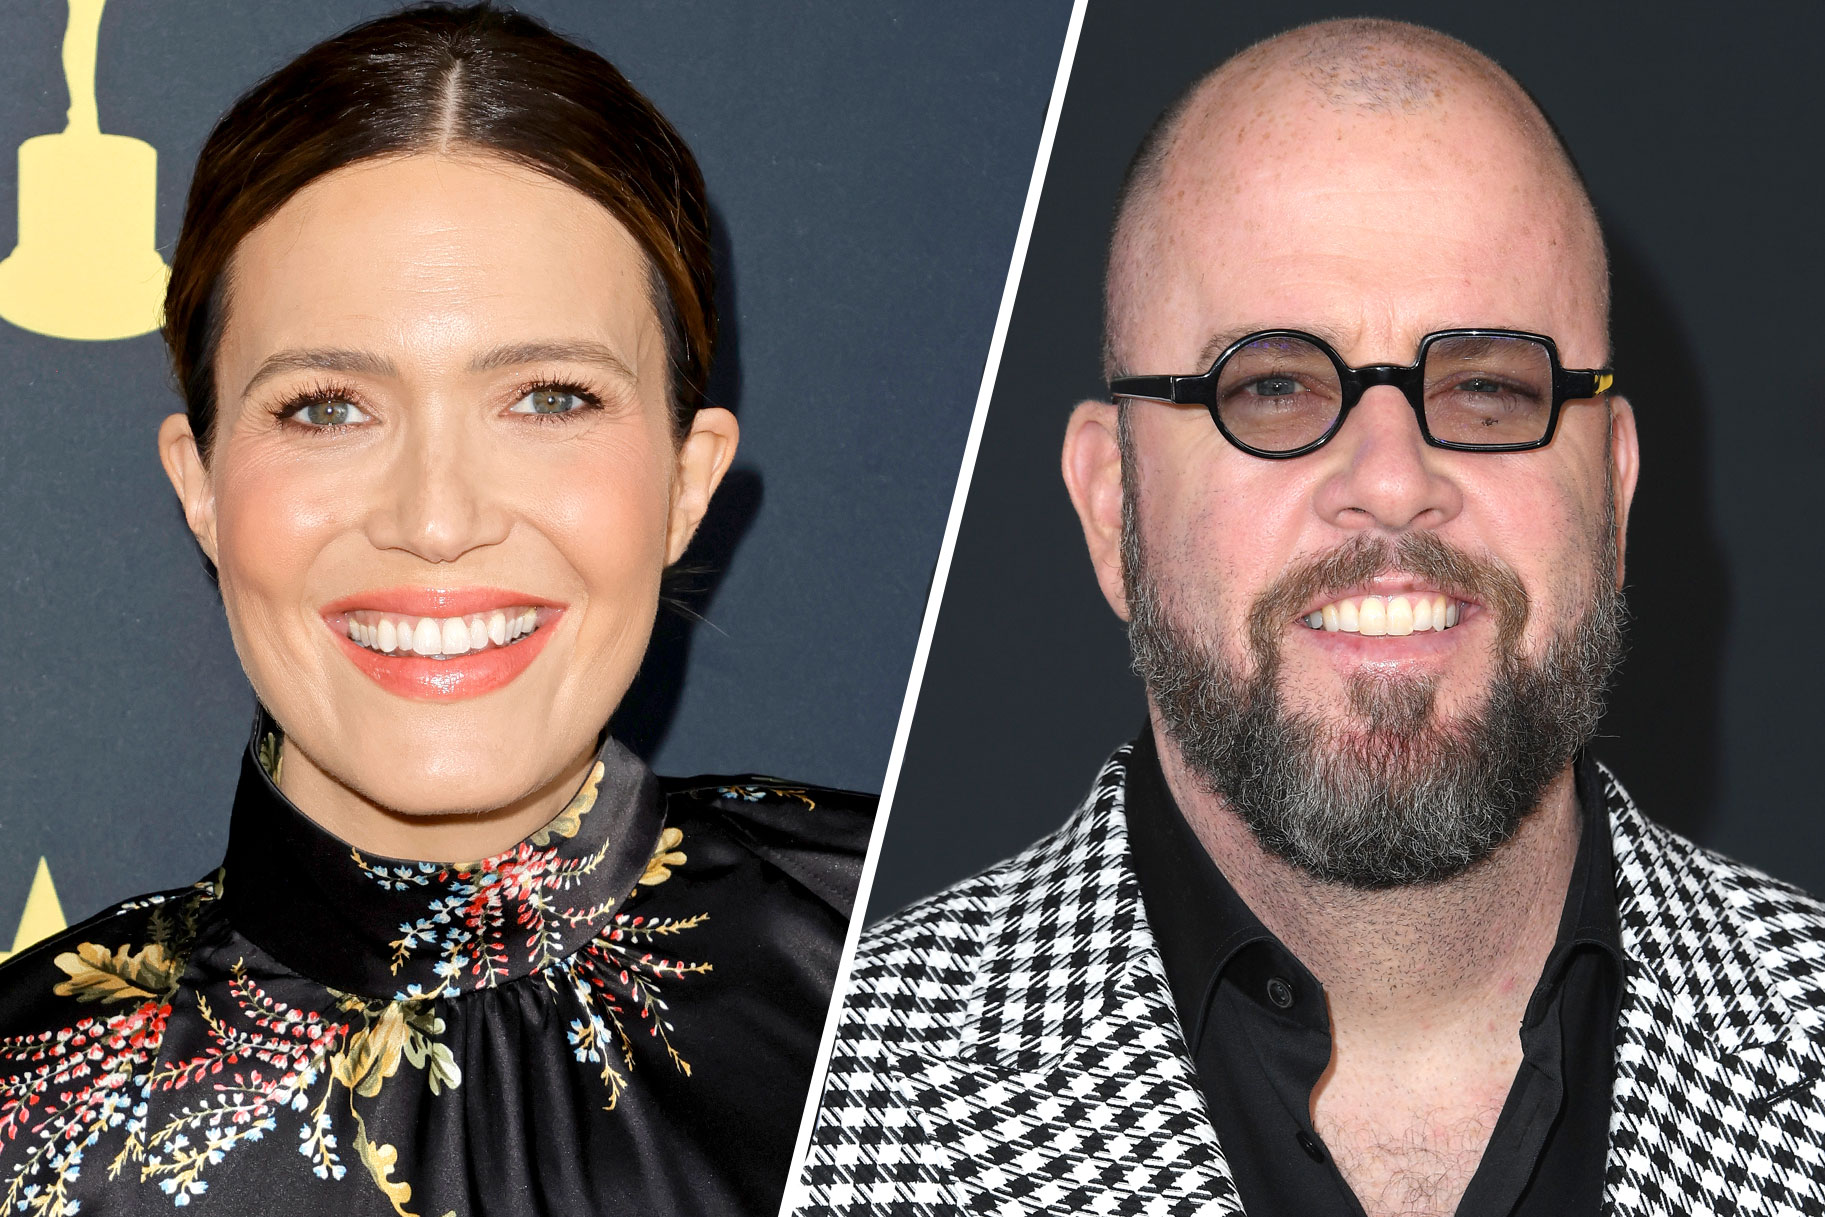 Mandy Moore and Chris Sullivan from This Is Us